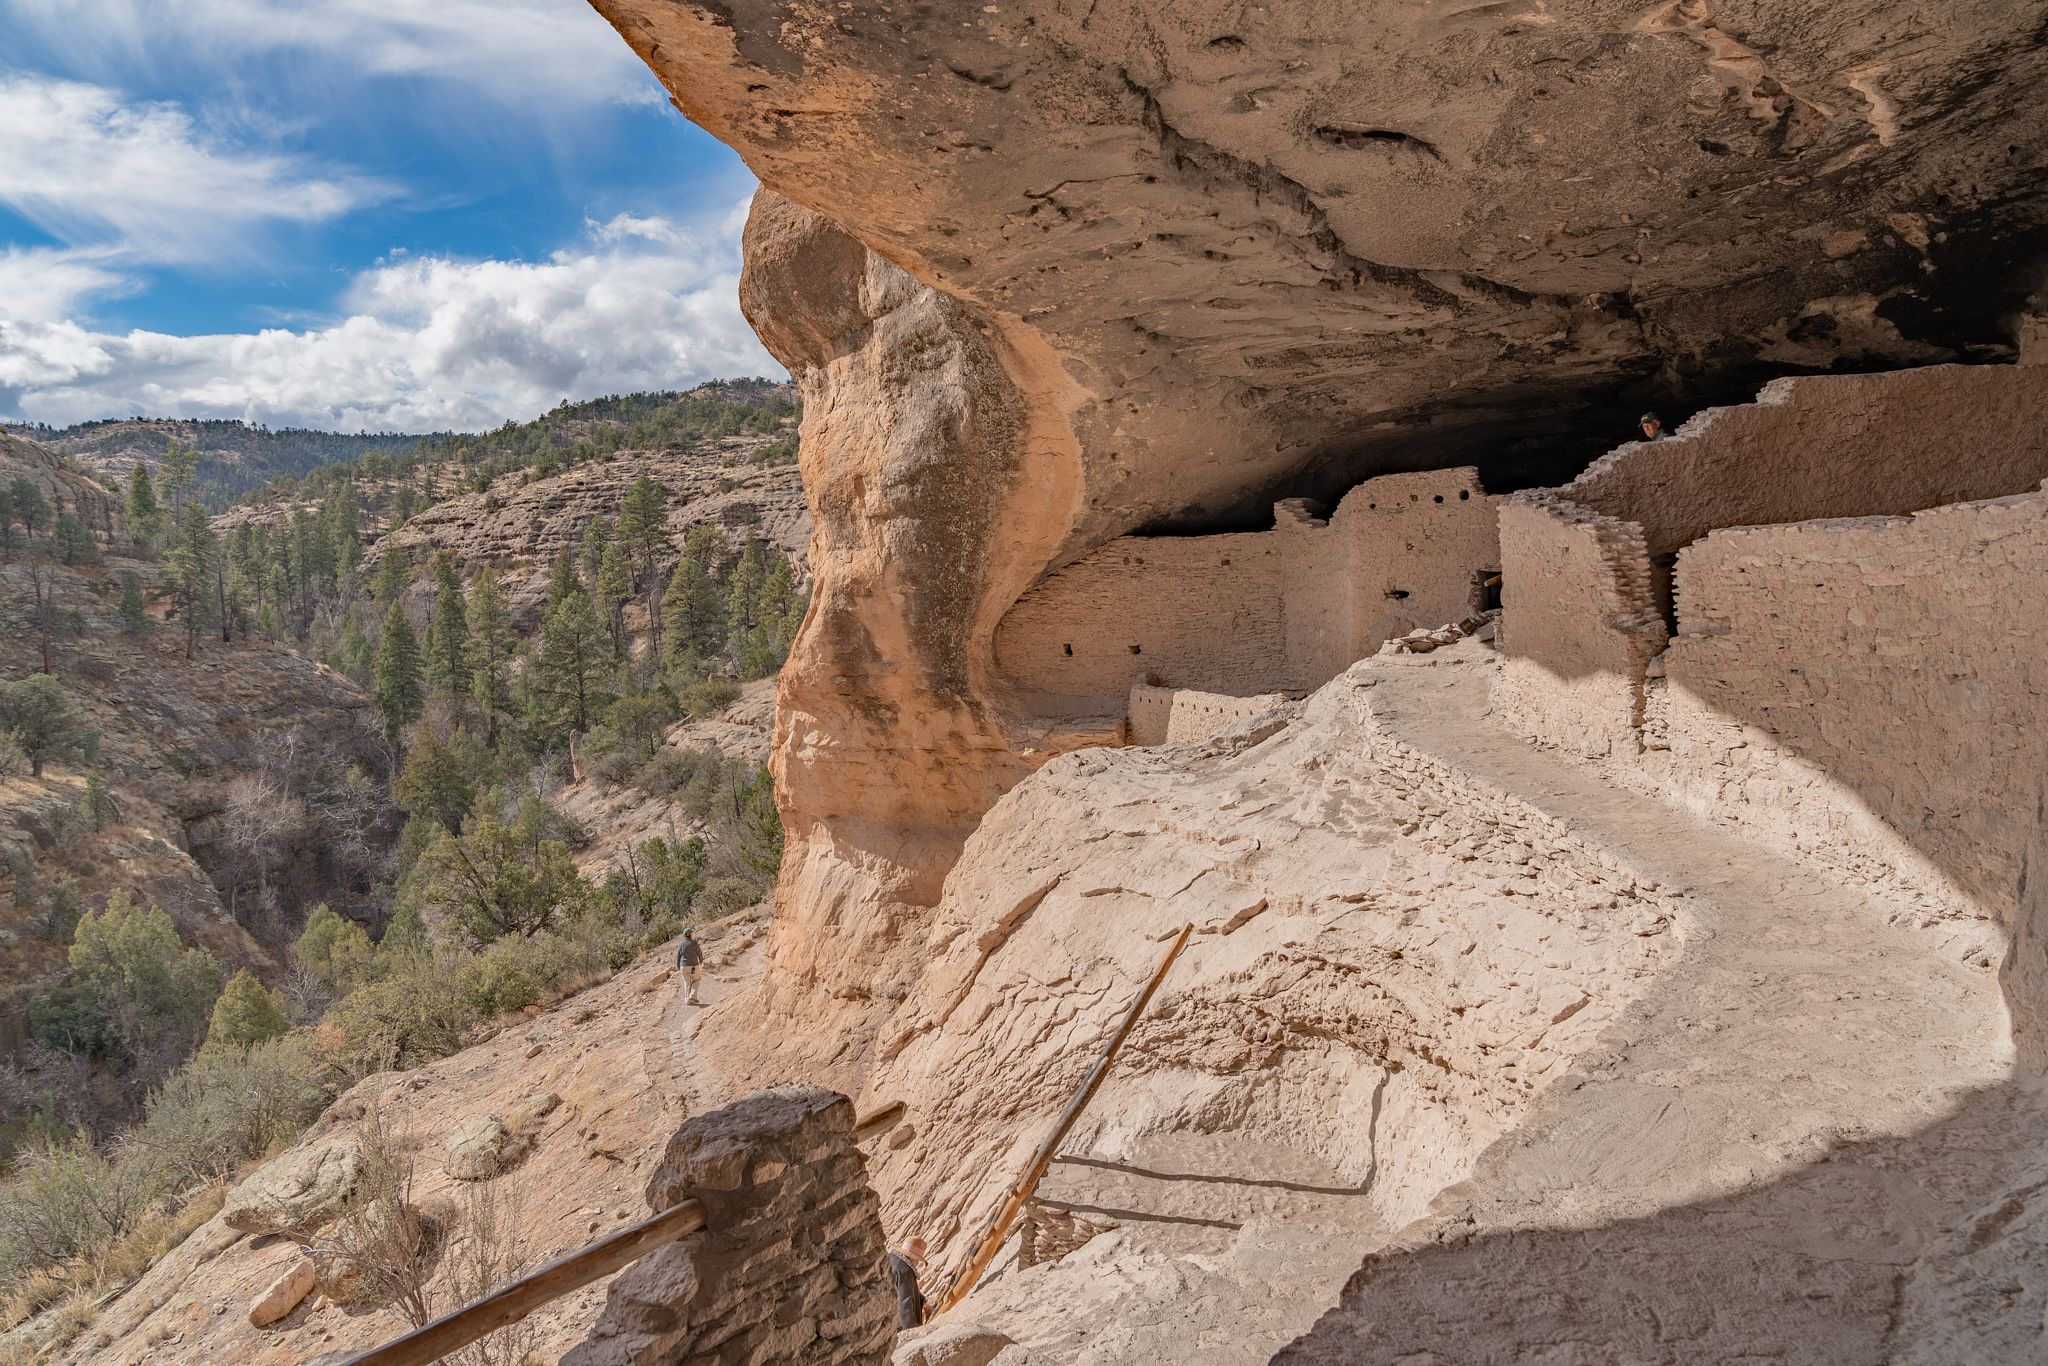 Gila Cliff Dwellings National Monument - Home of the Mogollon